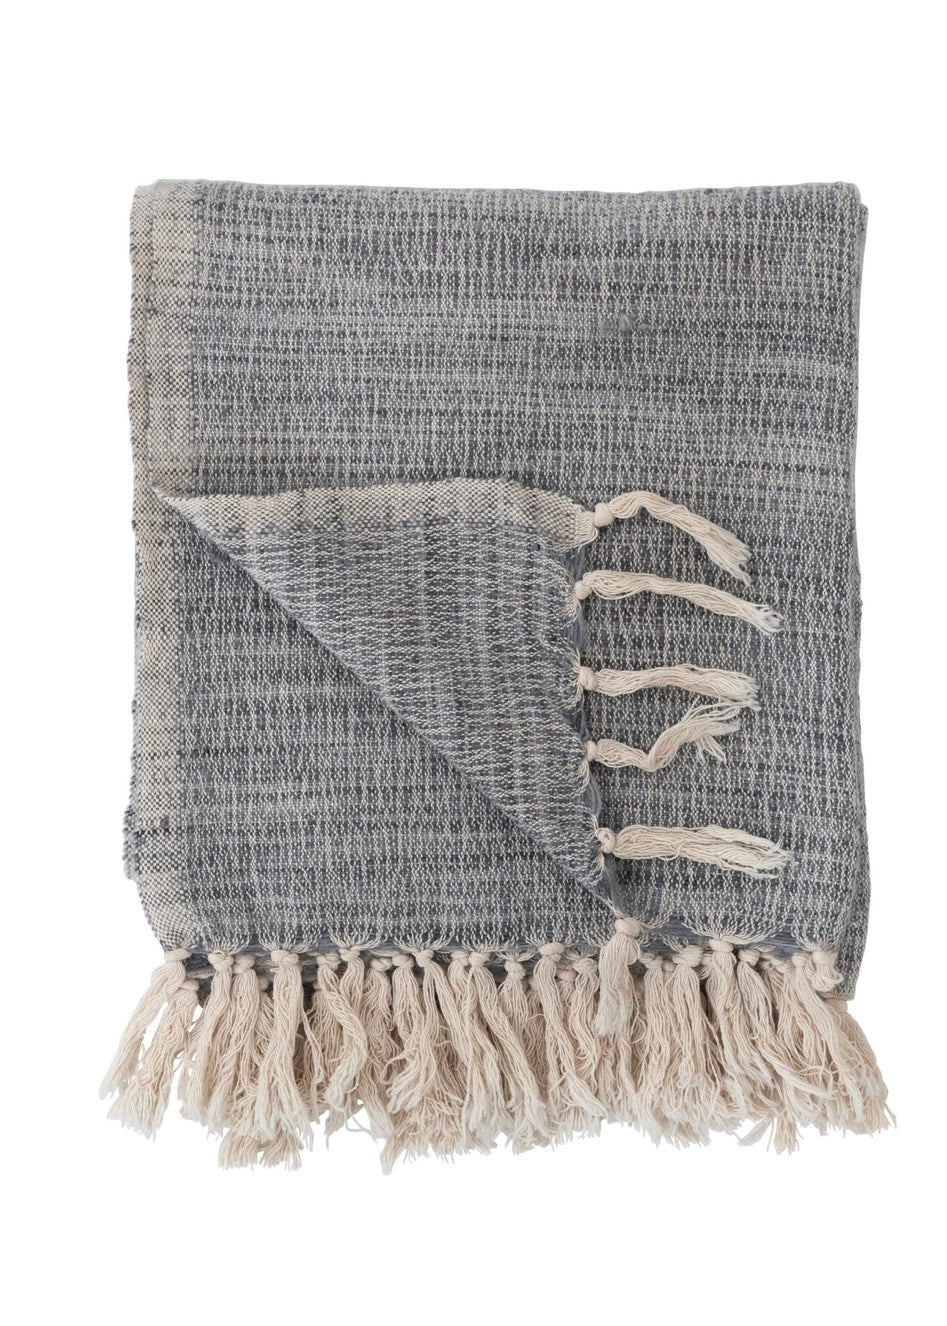 Woven Wool Throw - Farm Town Floral & Boutique